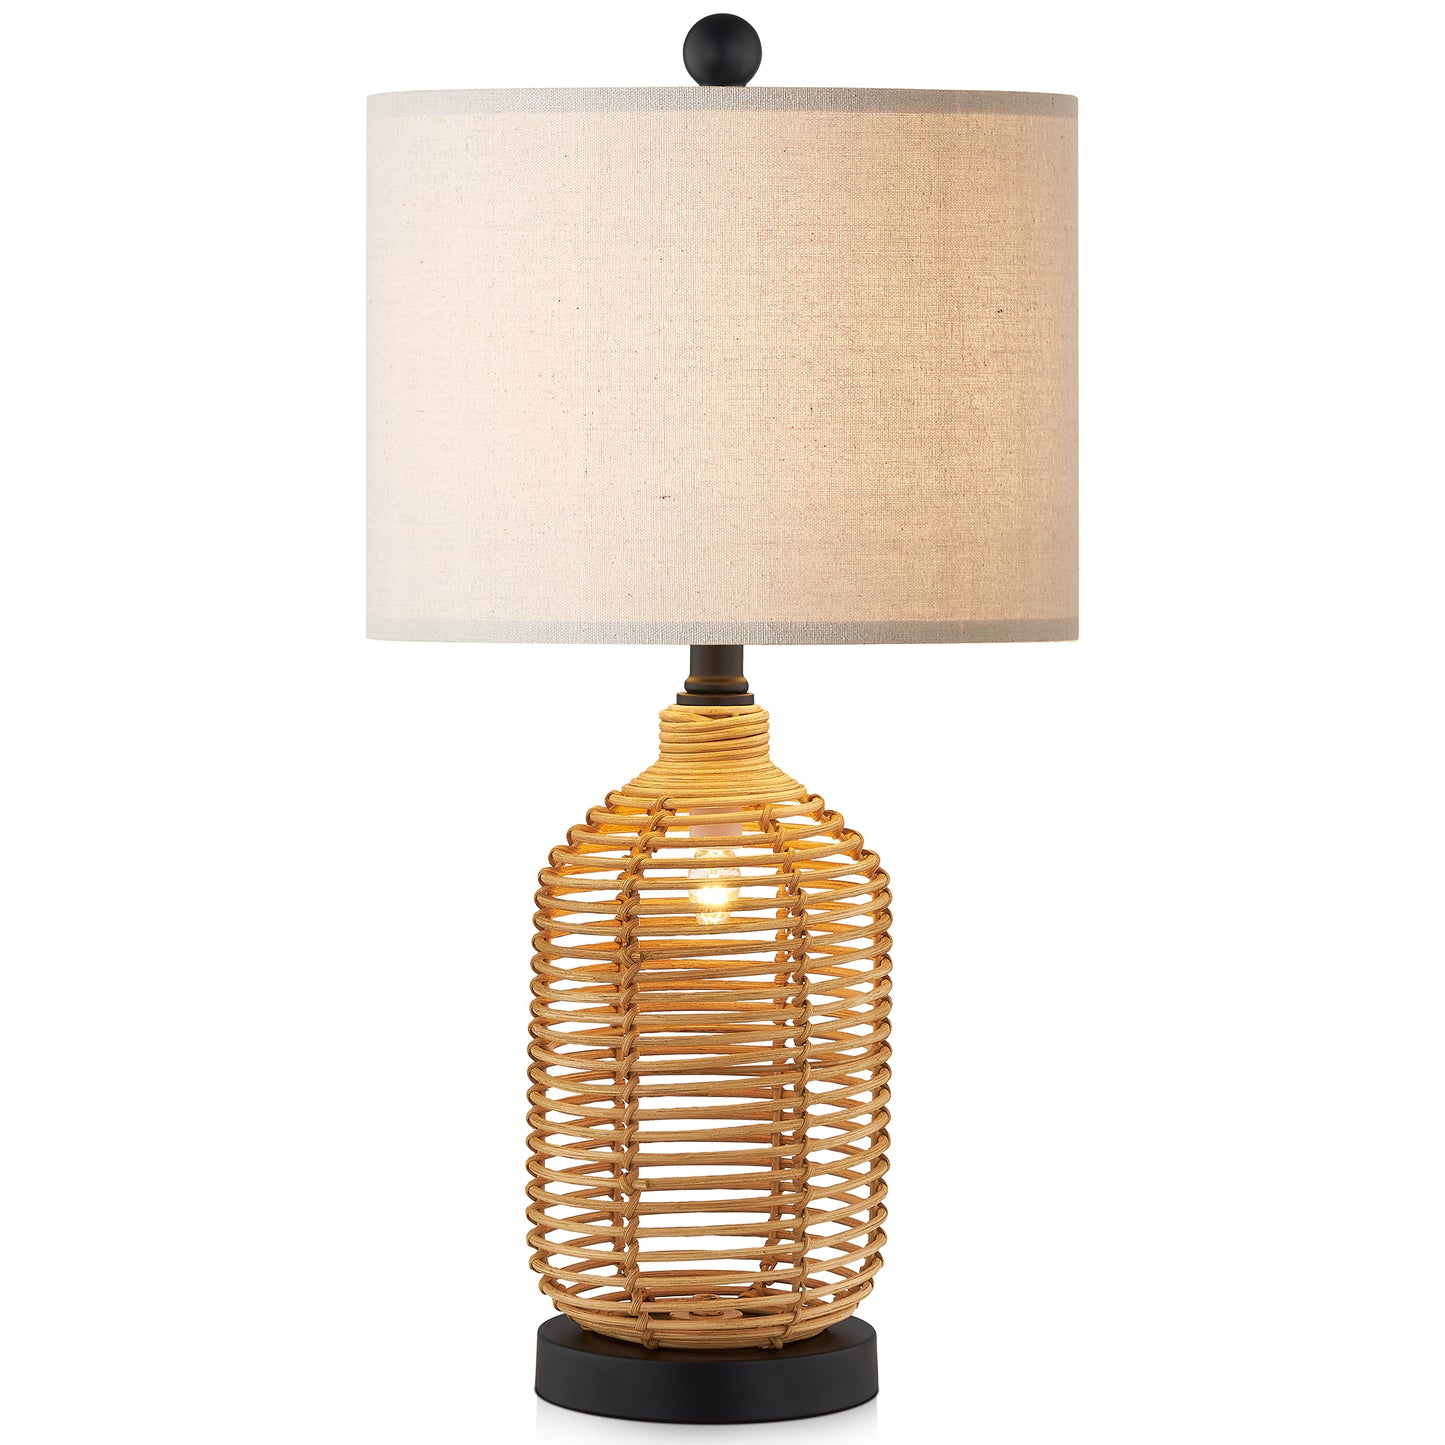 Twinset Versatile Rattan Table Lamp with 3-Way Rotary Switch & Dual Lighting Modes